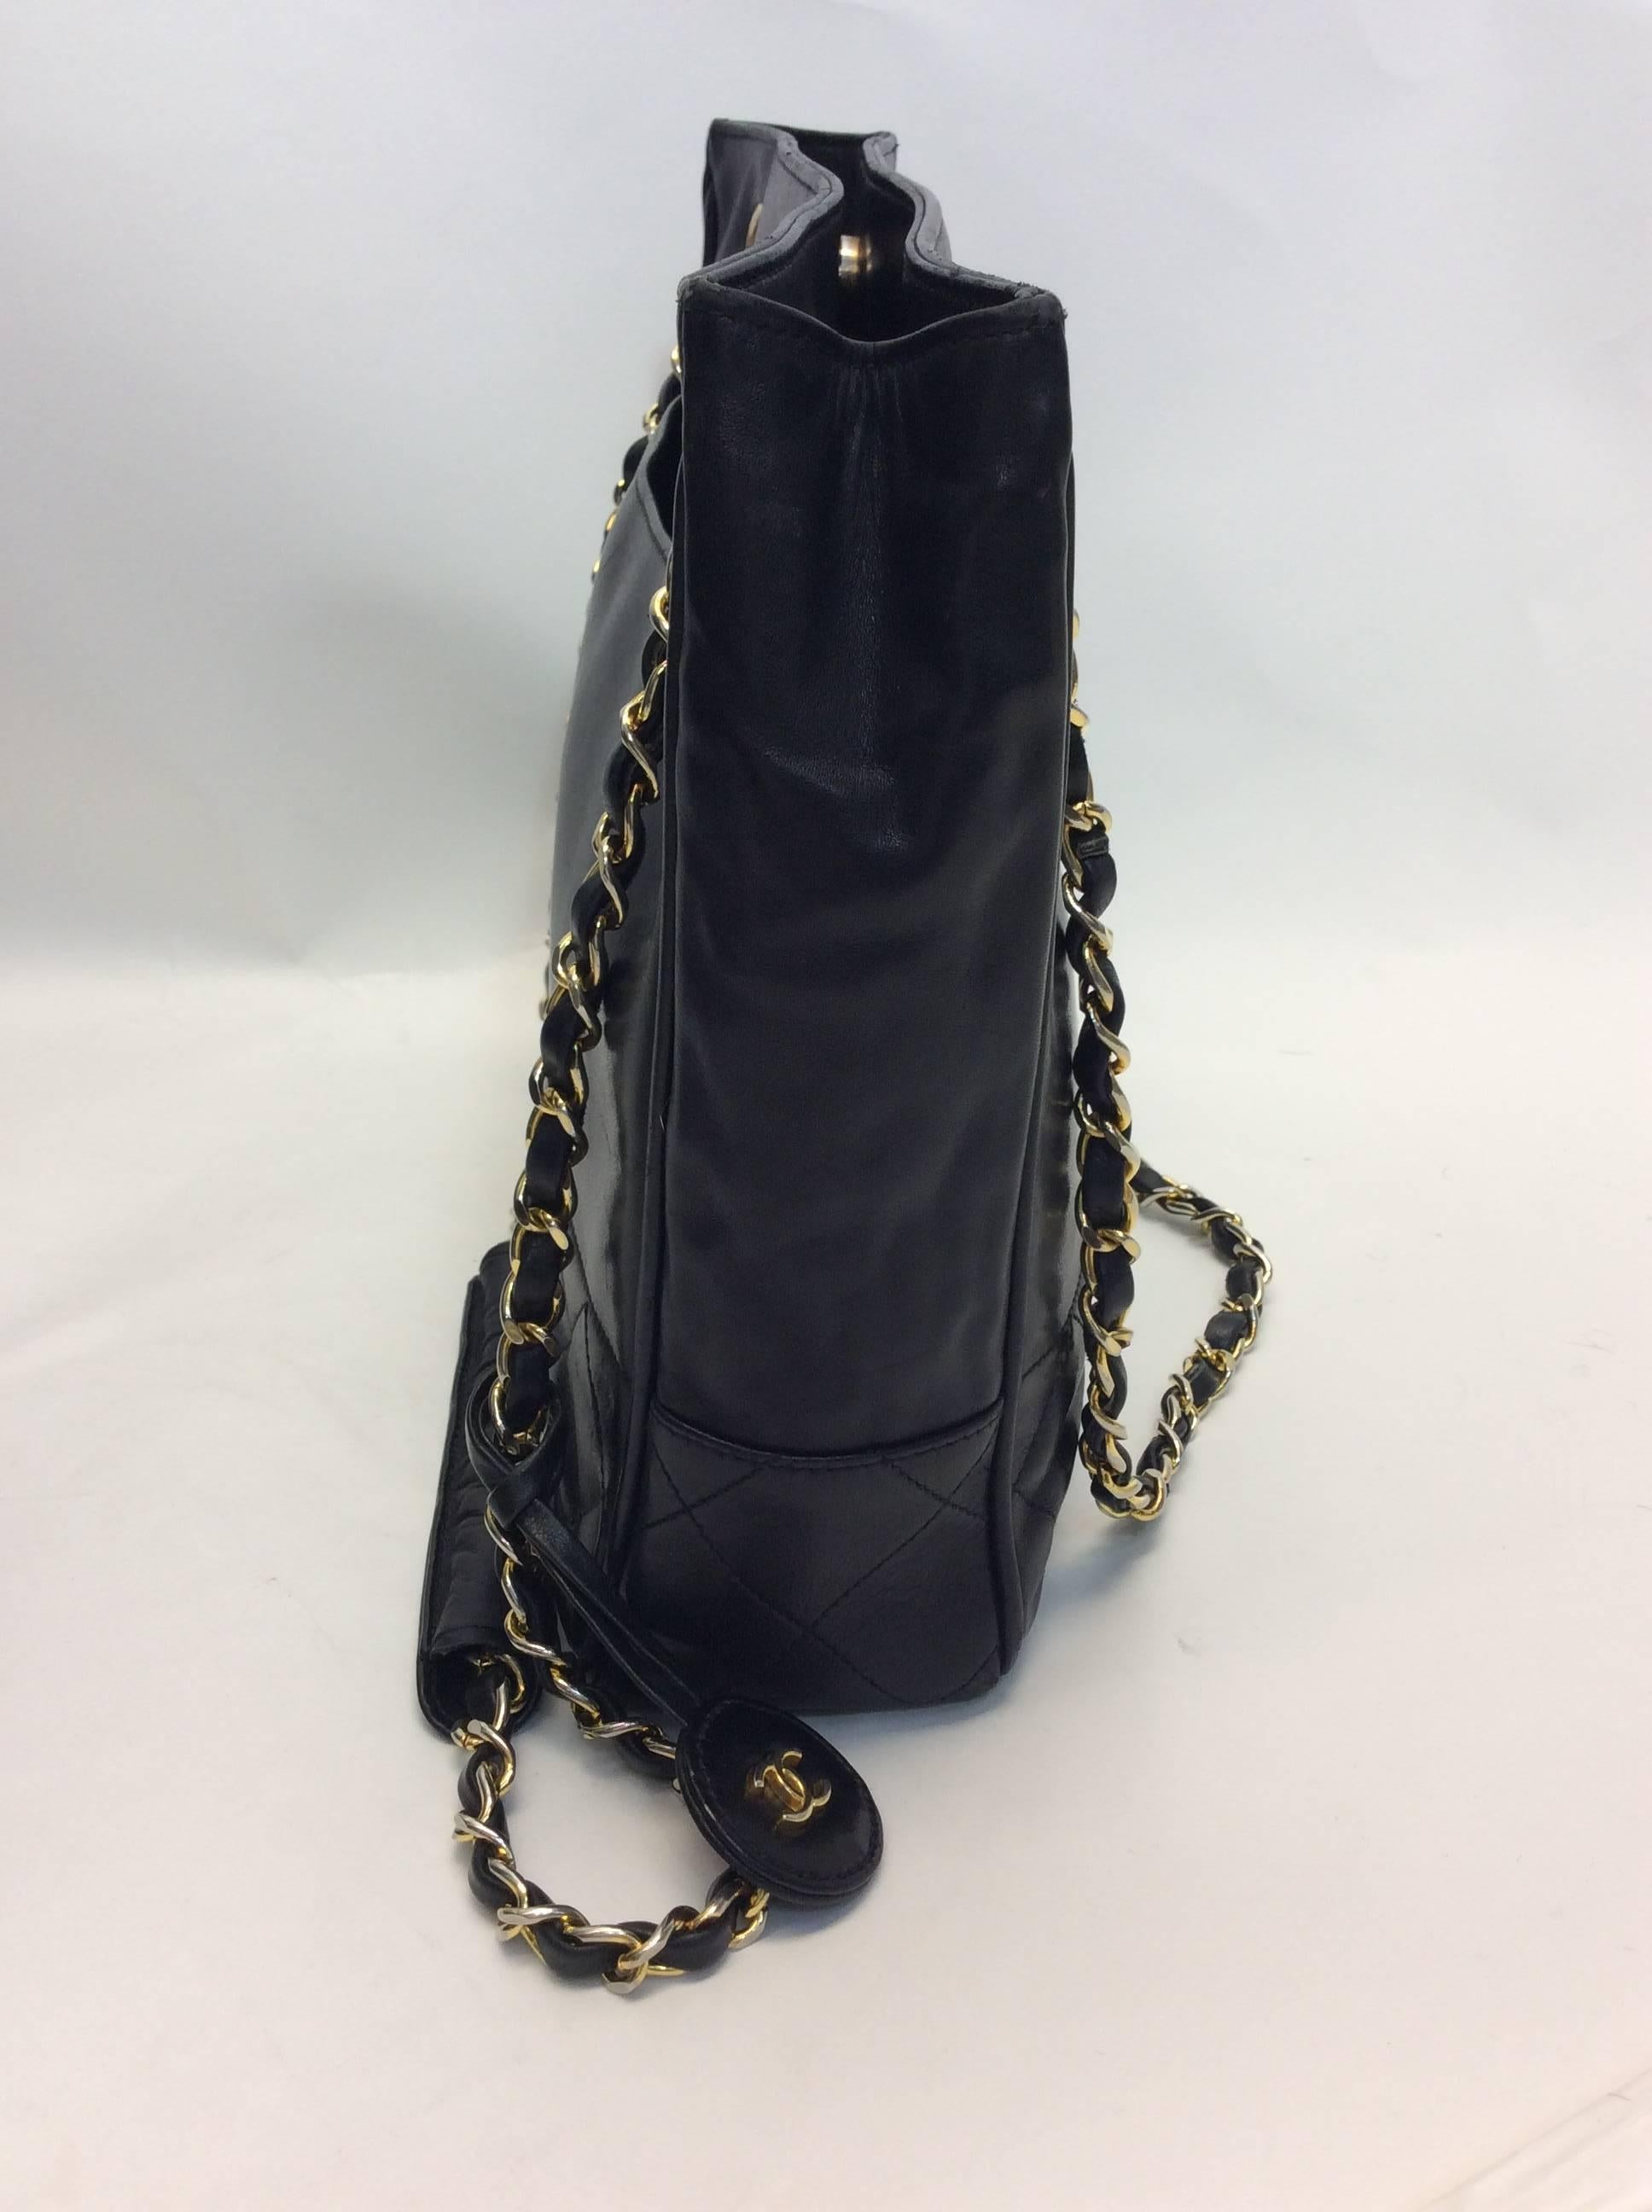 Vintage Chanel Black Quilted Chain Shoulder Handbag
Made in Italy
Features quilted section
Exterior pouch section on backside of bag
Gold tone chain with leather 
Interior zipper pocket 
$1100